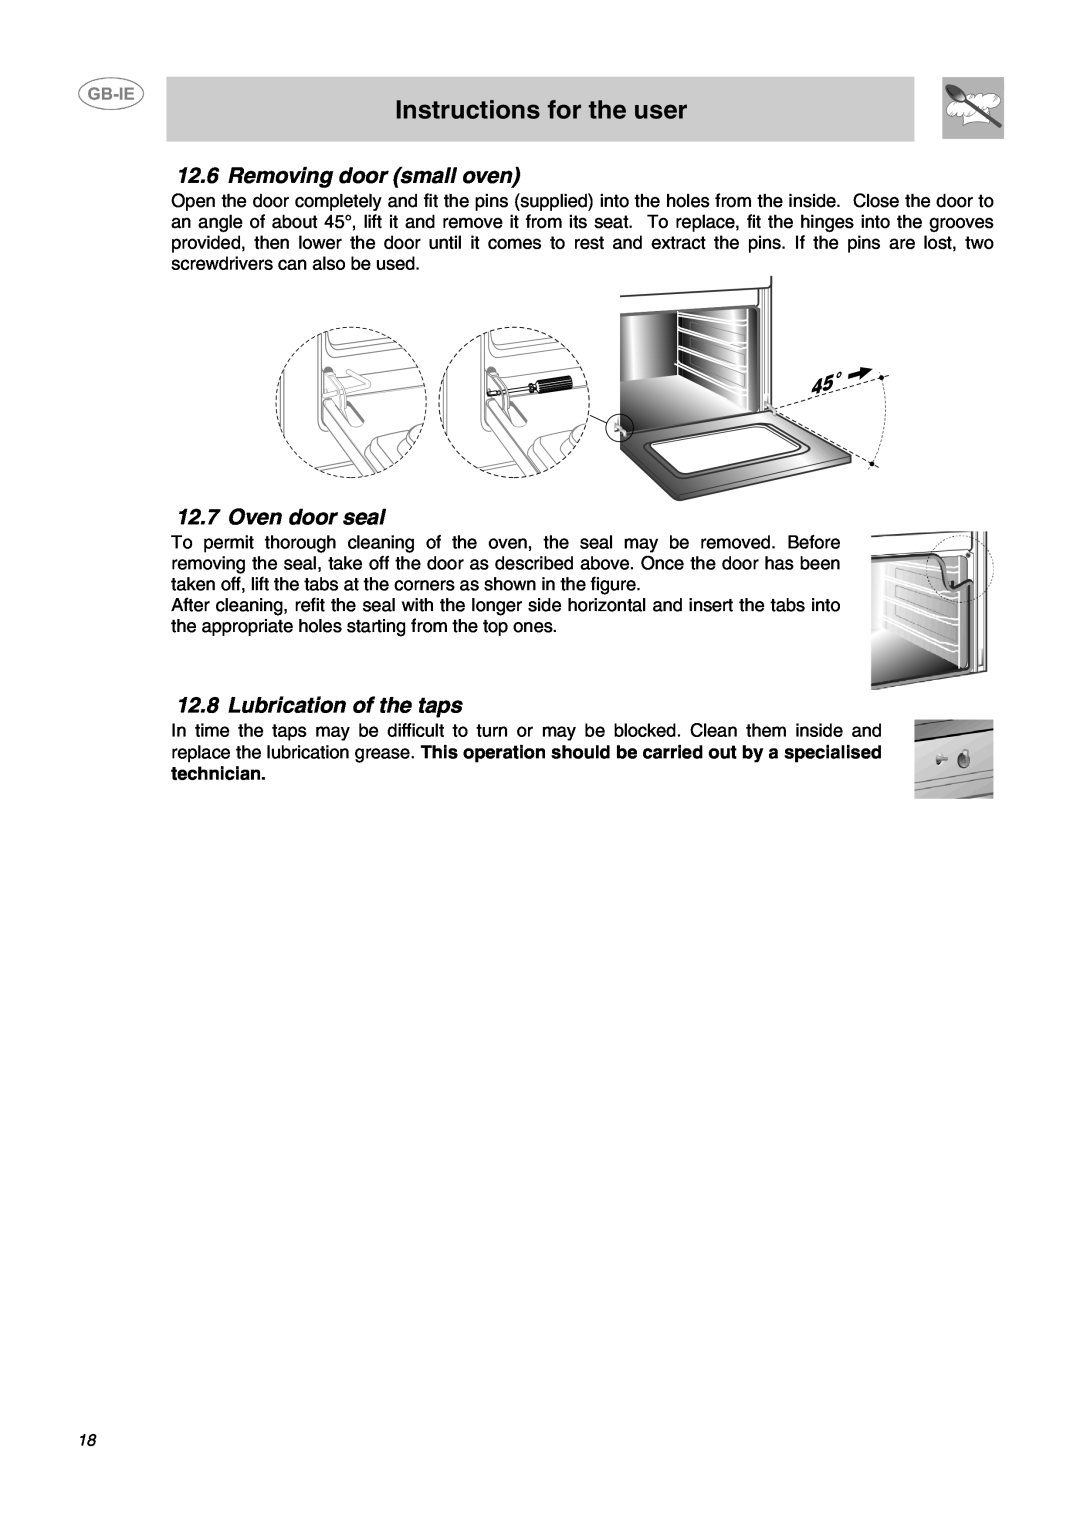 Smeg CC62MFX5 Removing door small oven, Oven door seal, Lubrication of the taps, Instructions for the user, technician 